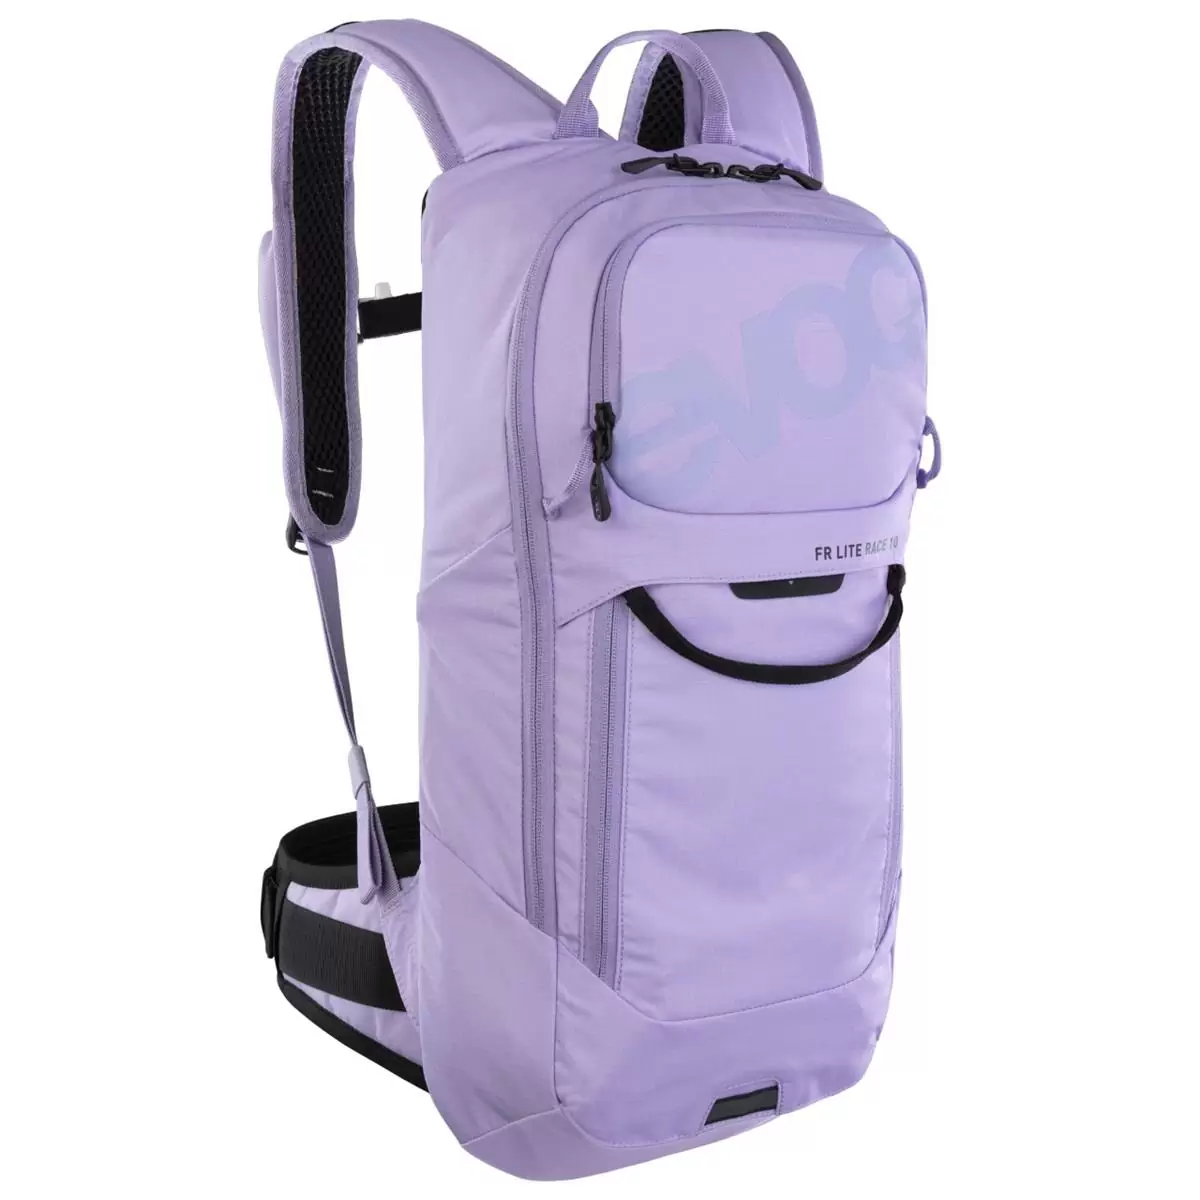 FR LITE RACE 10 Backpack With Back Protector 10L Purple Size M/L - image